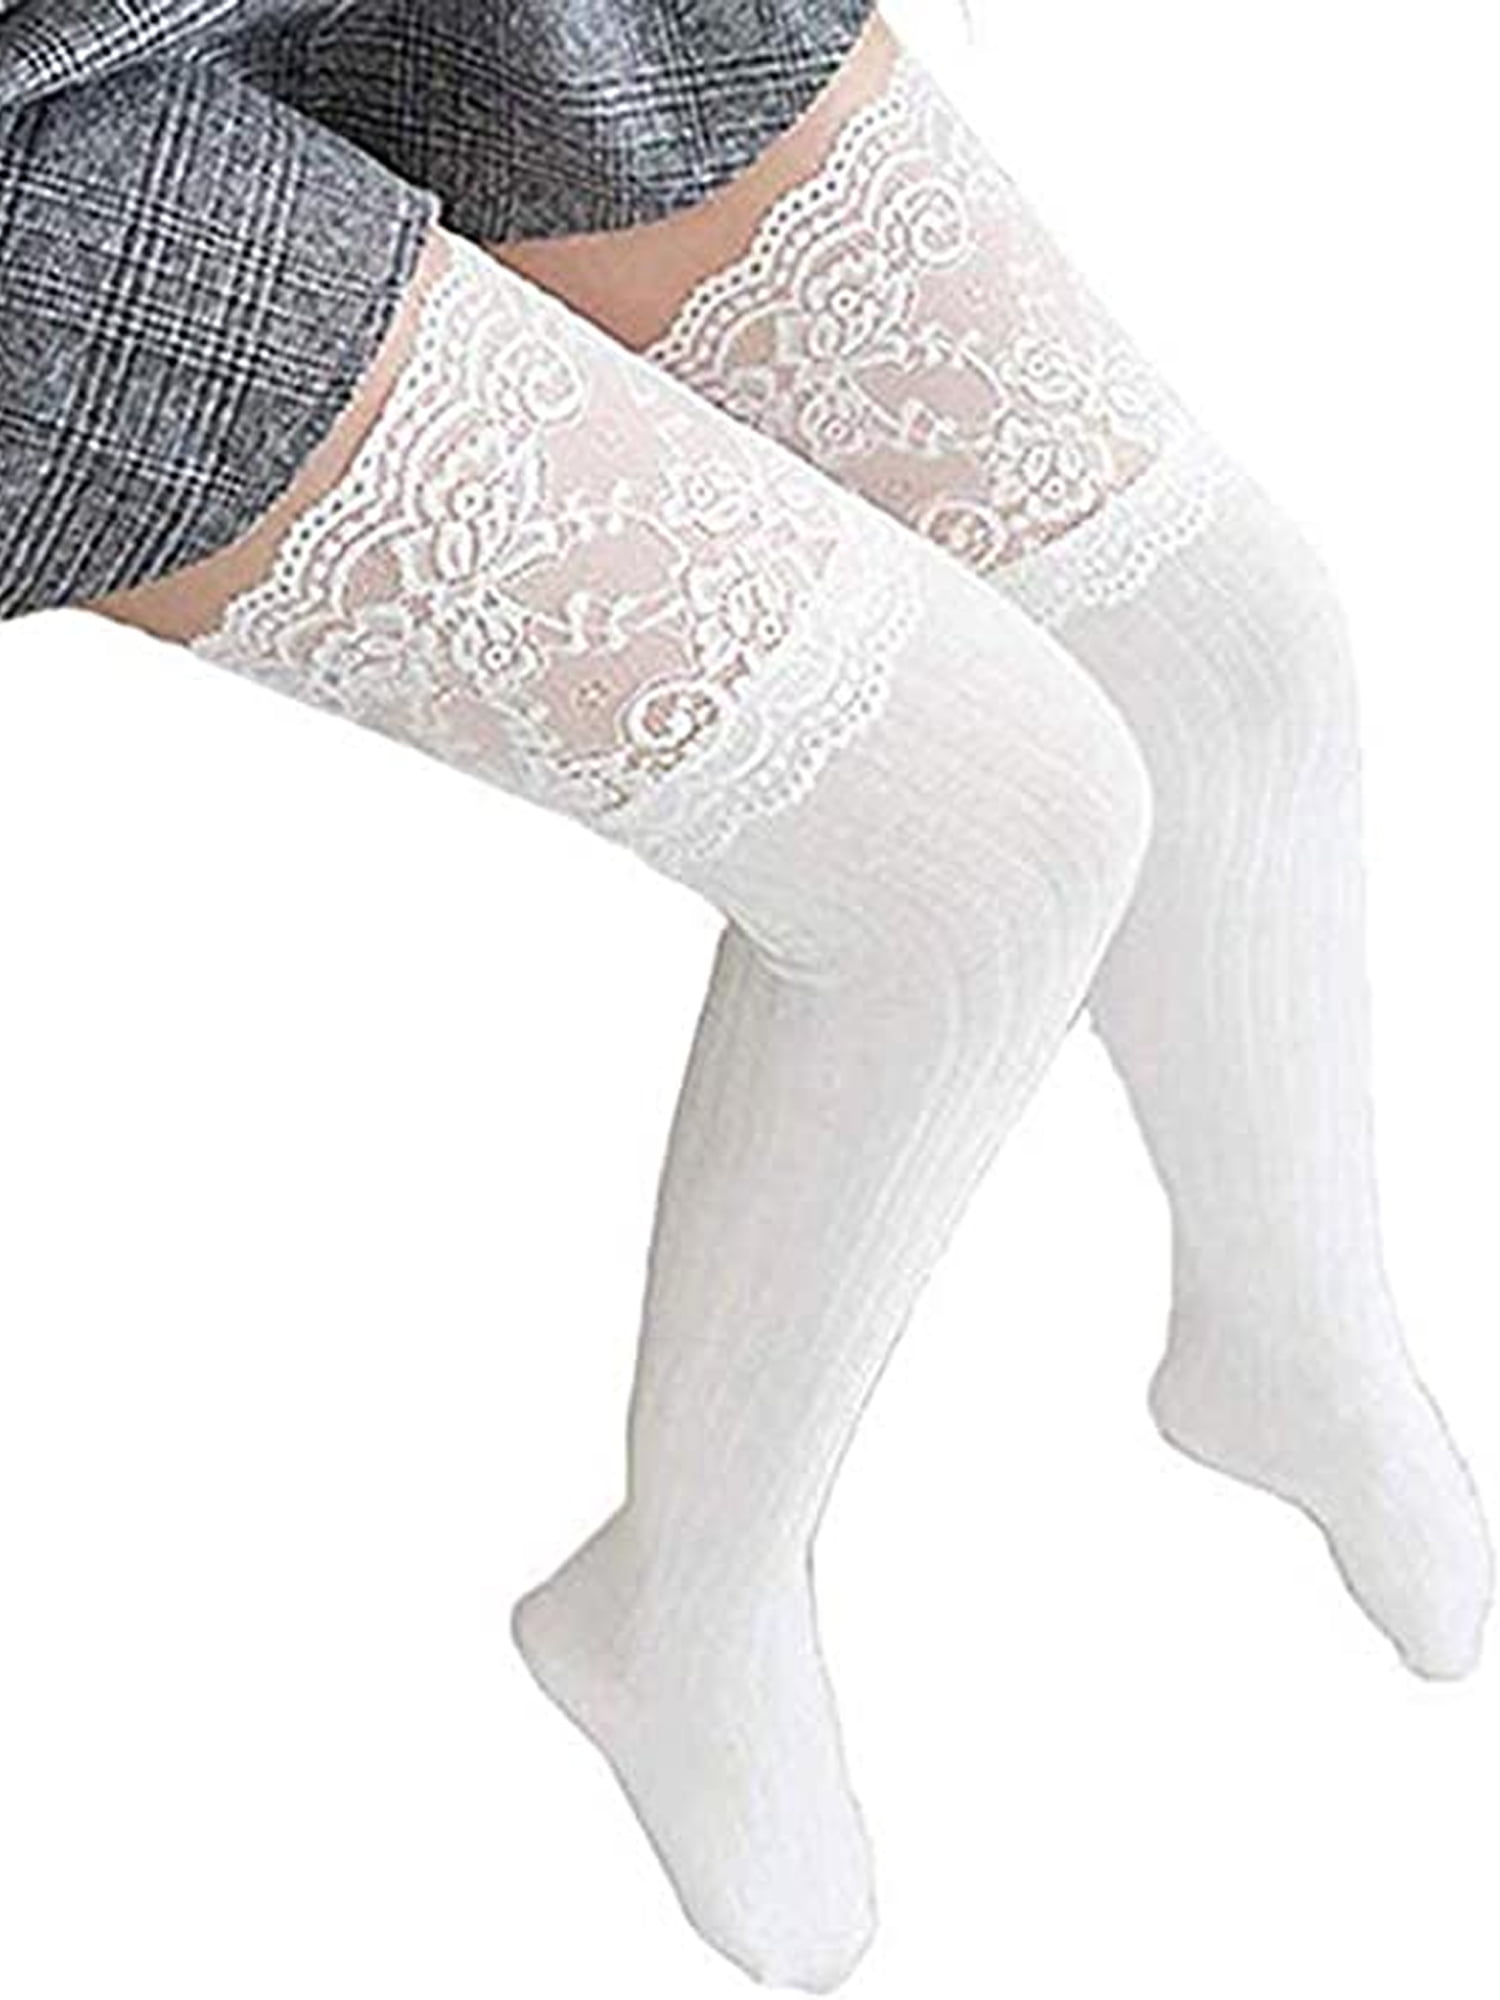 Womens Lace Over the Knee Socks Thigh High Long Cotton Stockings Winter Warmers 